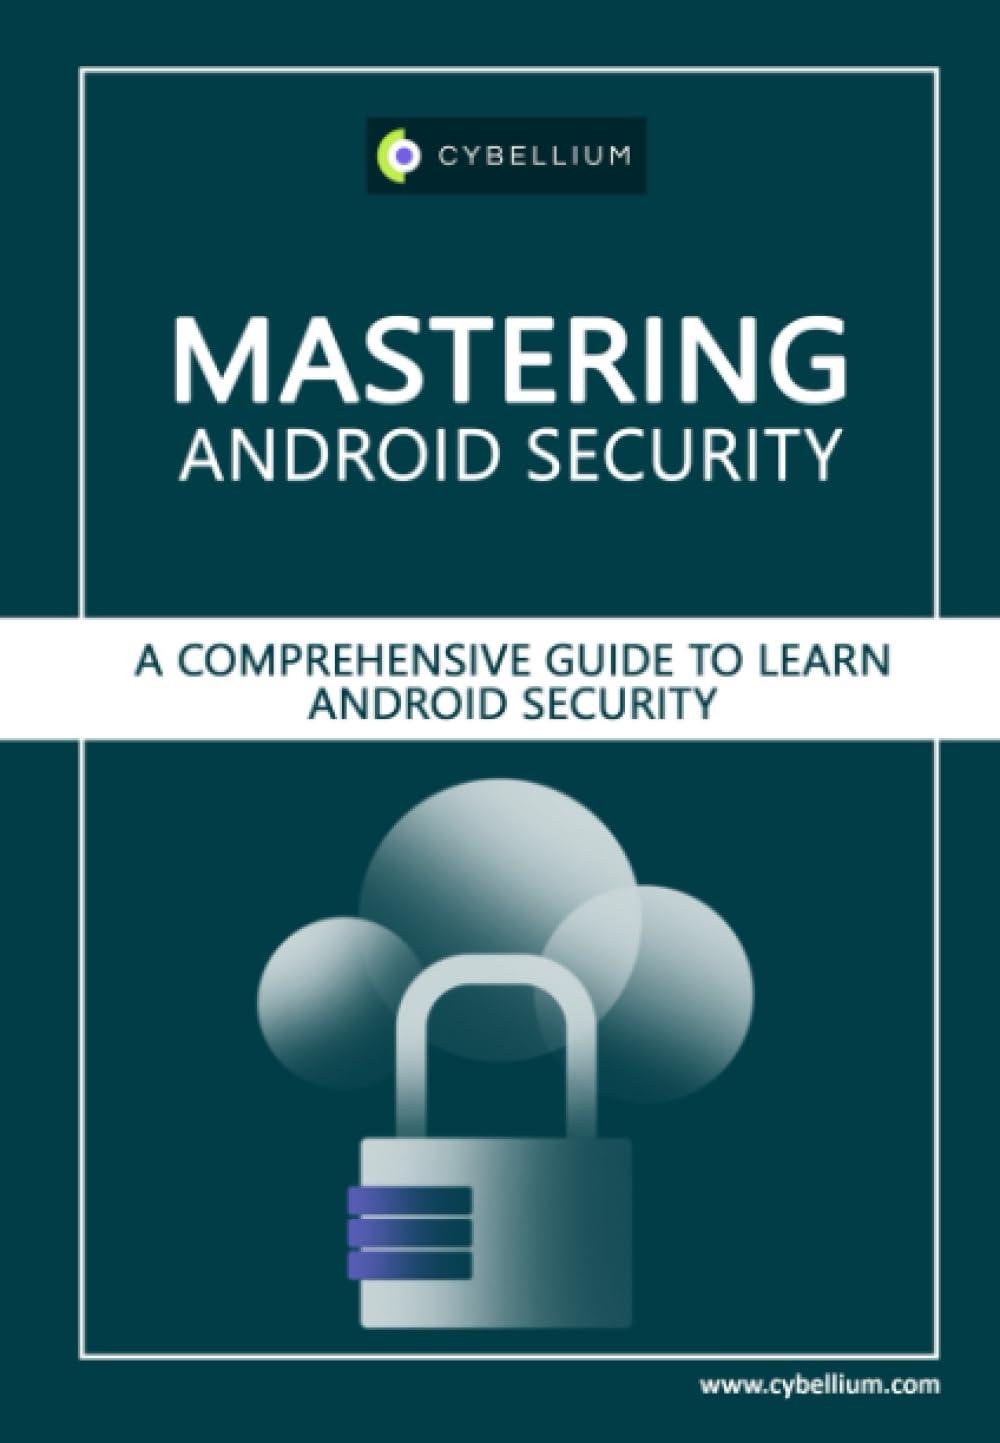 mastering android security a comprehensive guide to learn android security 1st edition cybellium ltd, kris